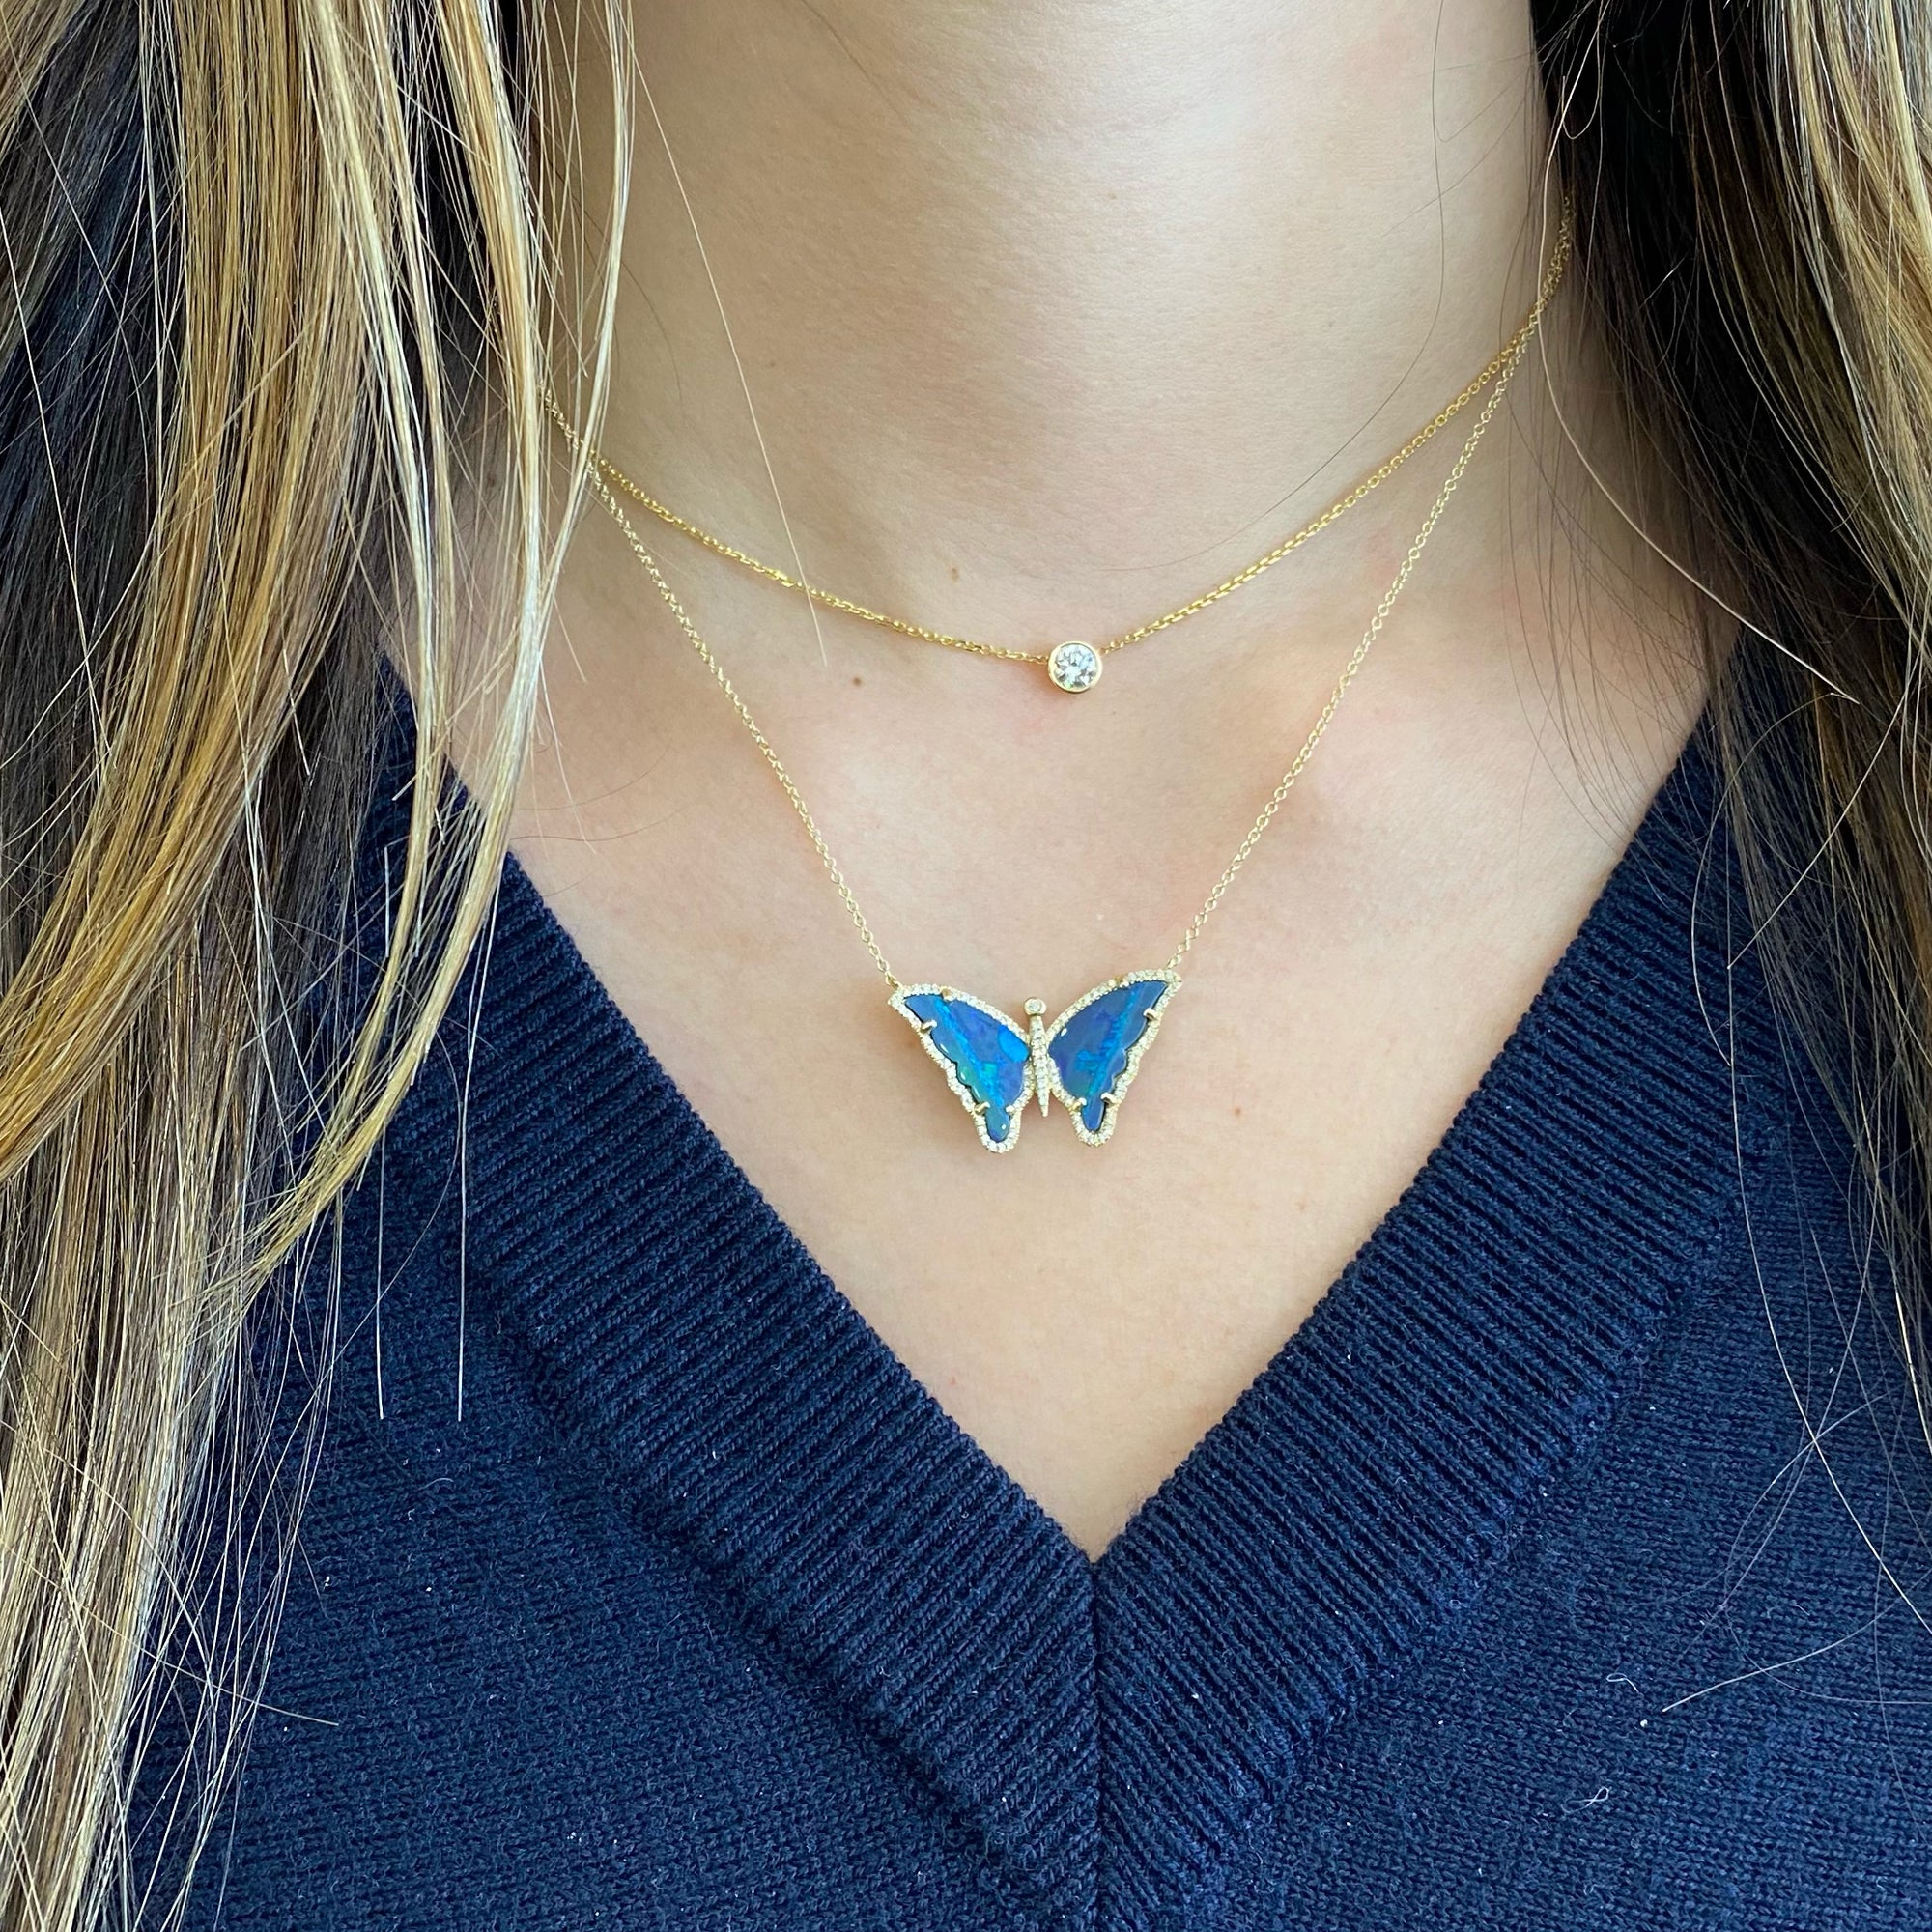 Opal & Diamond Butterfly Necklace  - 14K gold weighing 3.27 grams  - 2 opal weighing 1.93 carats  - 91 round diamonds totaling 0.23 carats